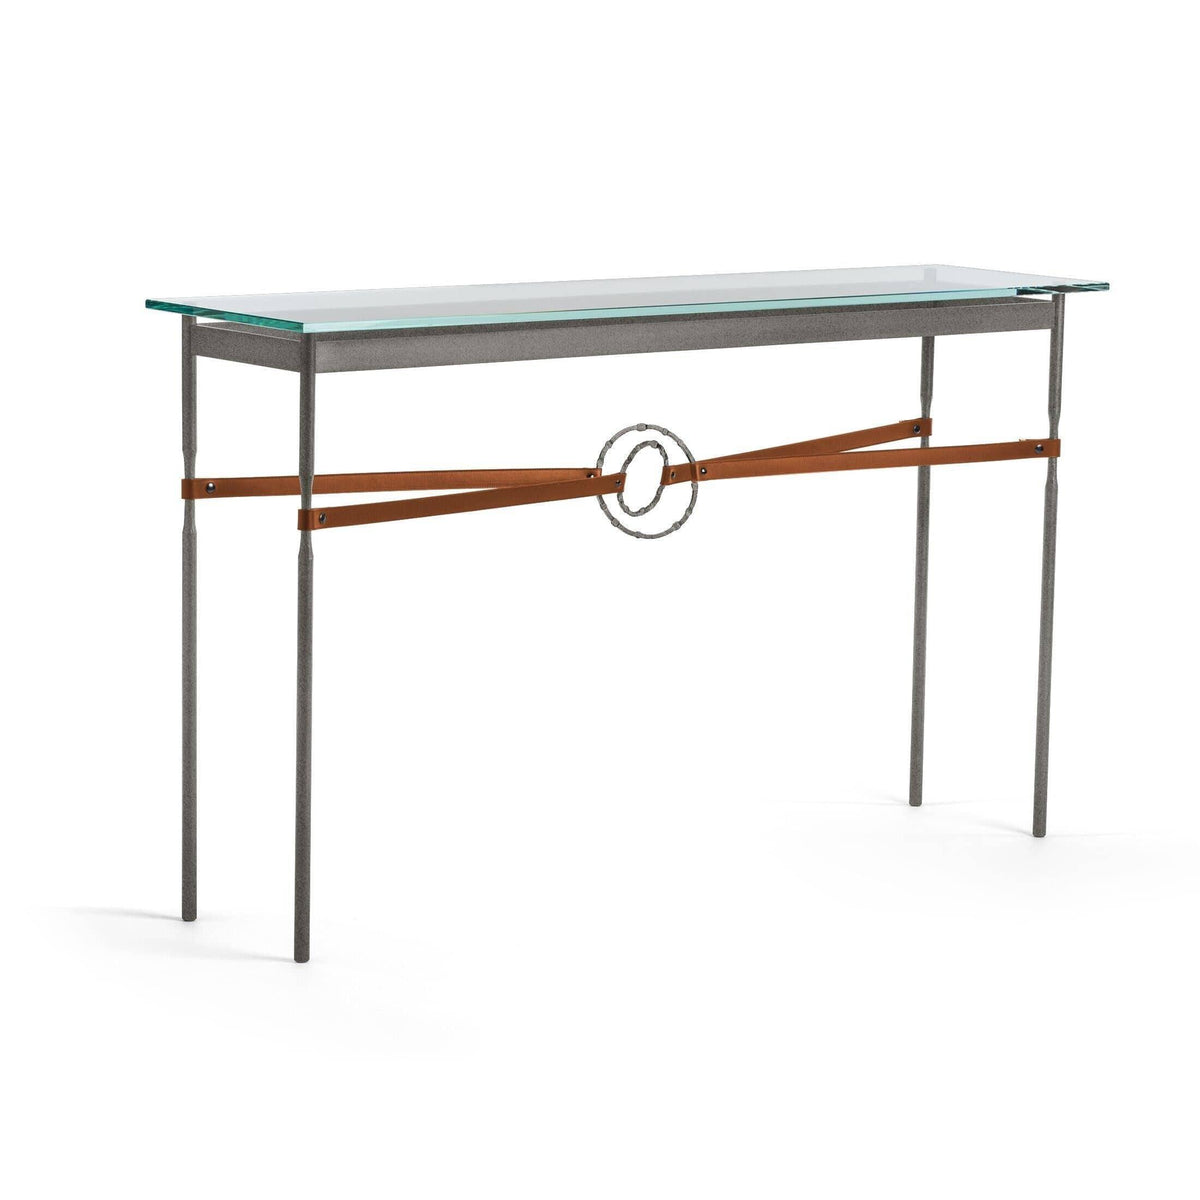 Hubbardton Forge - Equus Chestnut Leather Console Table - 750118-20-20-LC-VA0714 | Montreal Lighting & Hardware